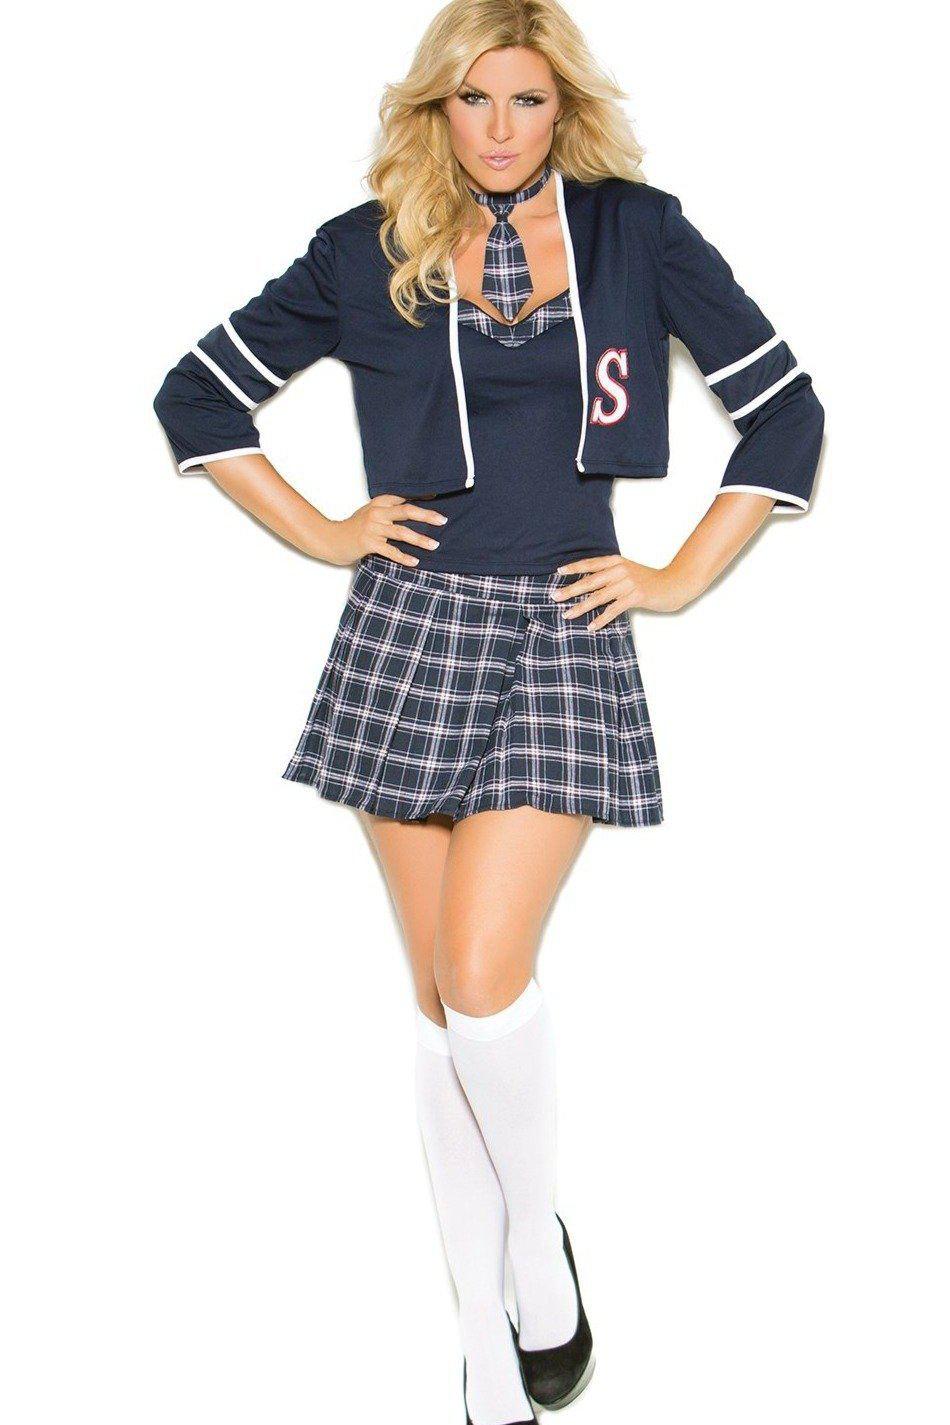 Plus Size Class Distraction School Girl Costume | Elegant Moments | Sexyshoes.com | Free Shipping $79 |